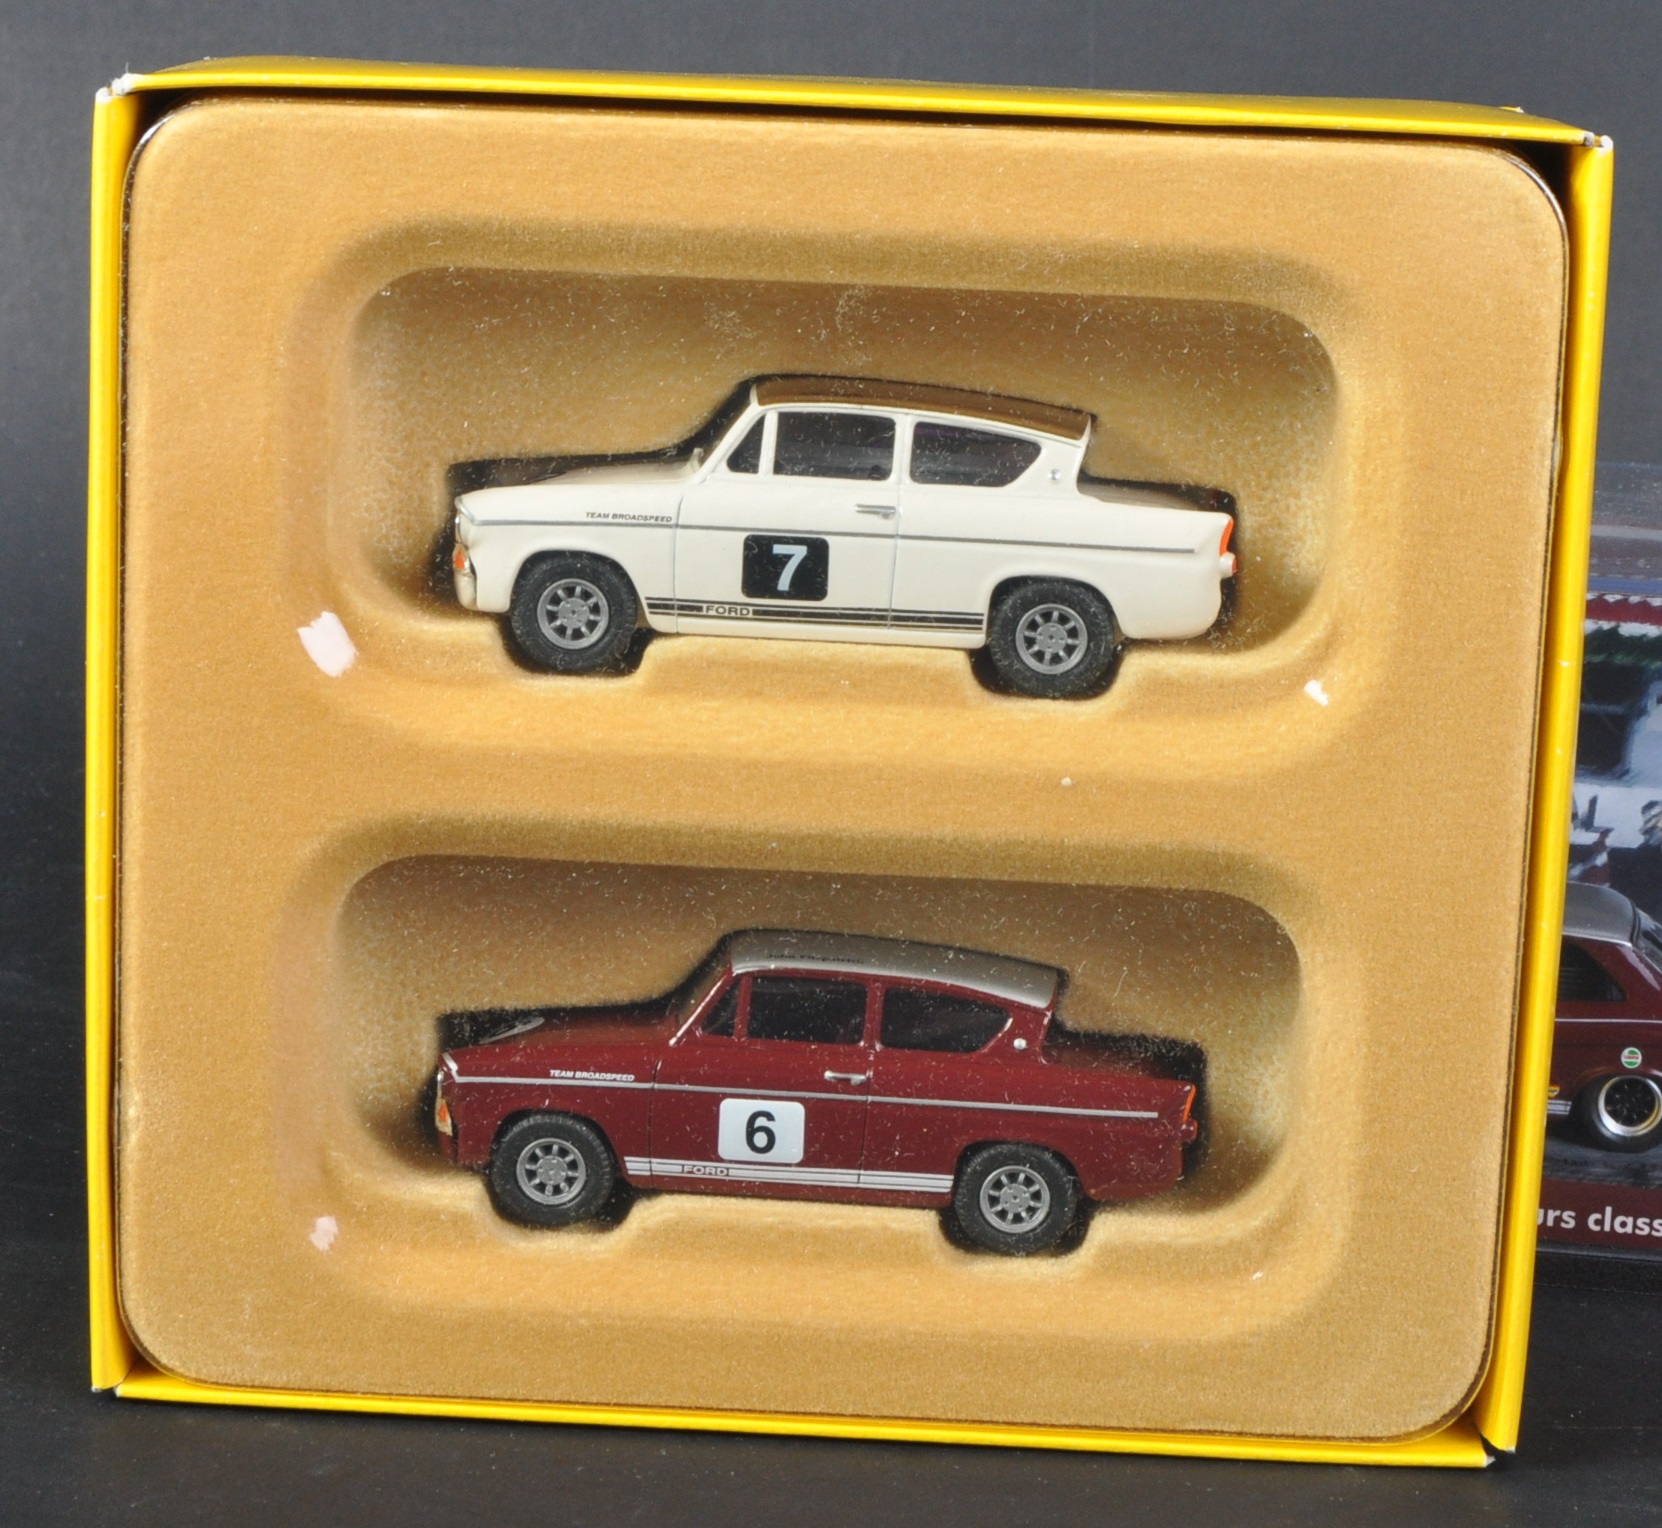 TWO 1/43 SCALE BROADSPEED INTEREST DIECAST MODEL CARS - Image 5 of 5